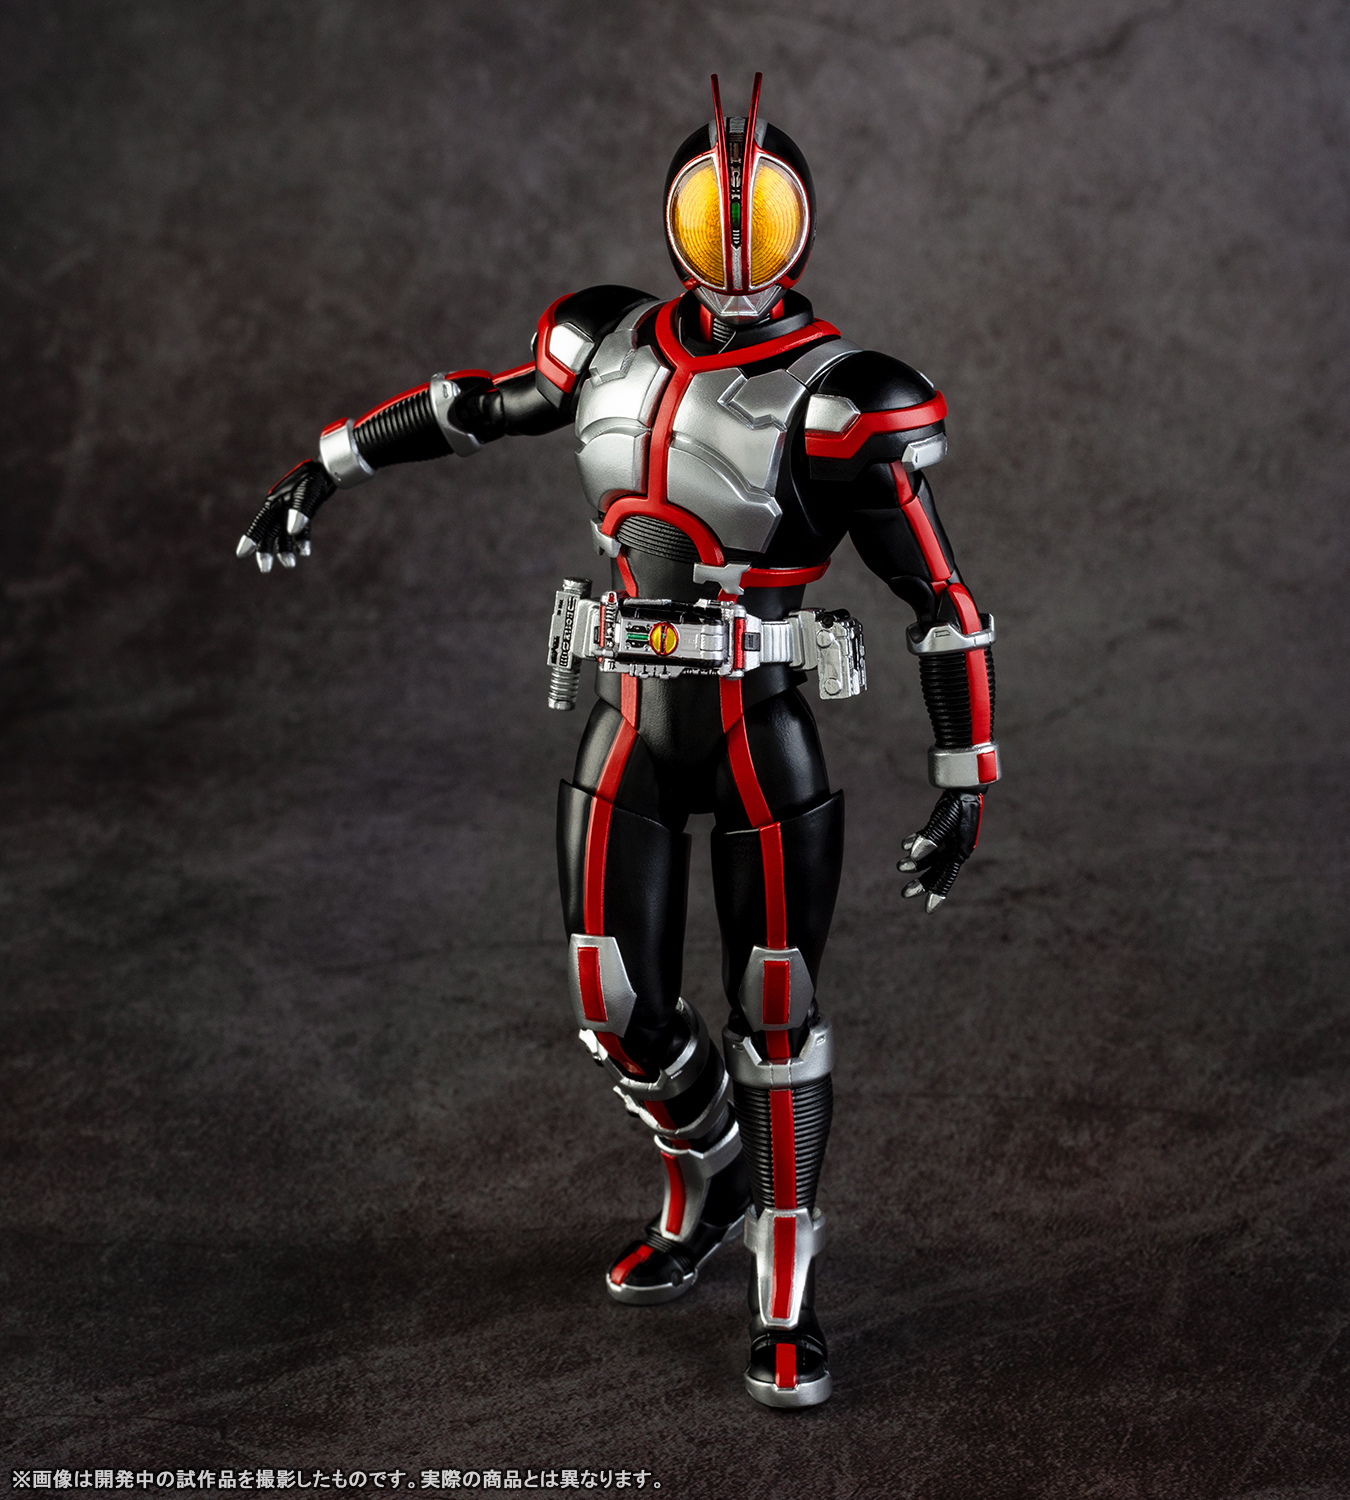 Open your eyes for the 仮面ライダーファイズ」紹介  TAMASHII NATIONS 公式ブログ